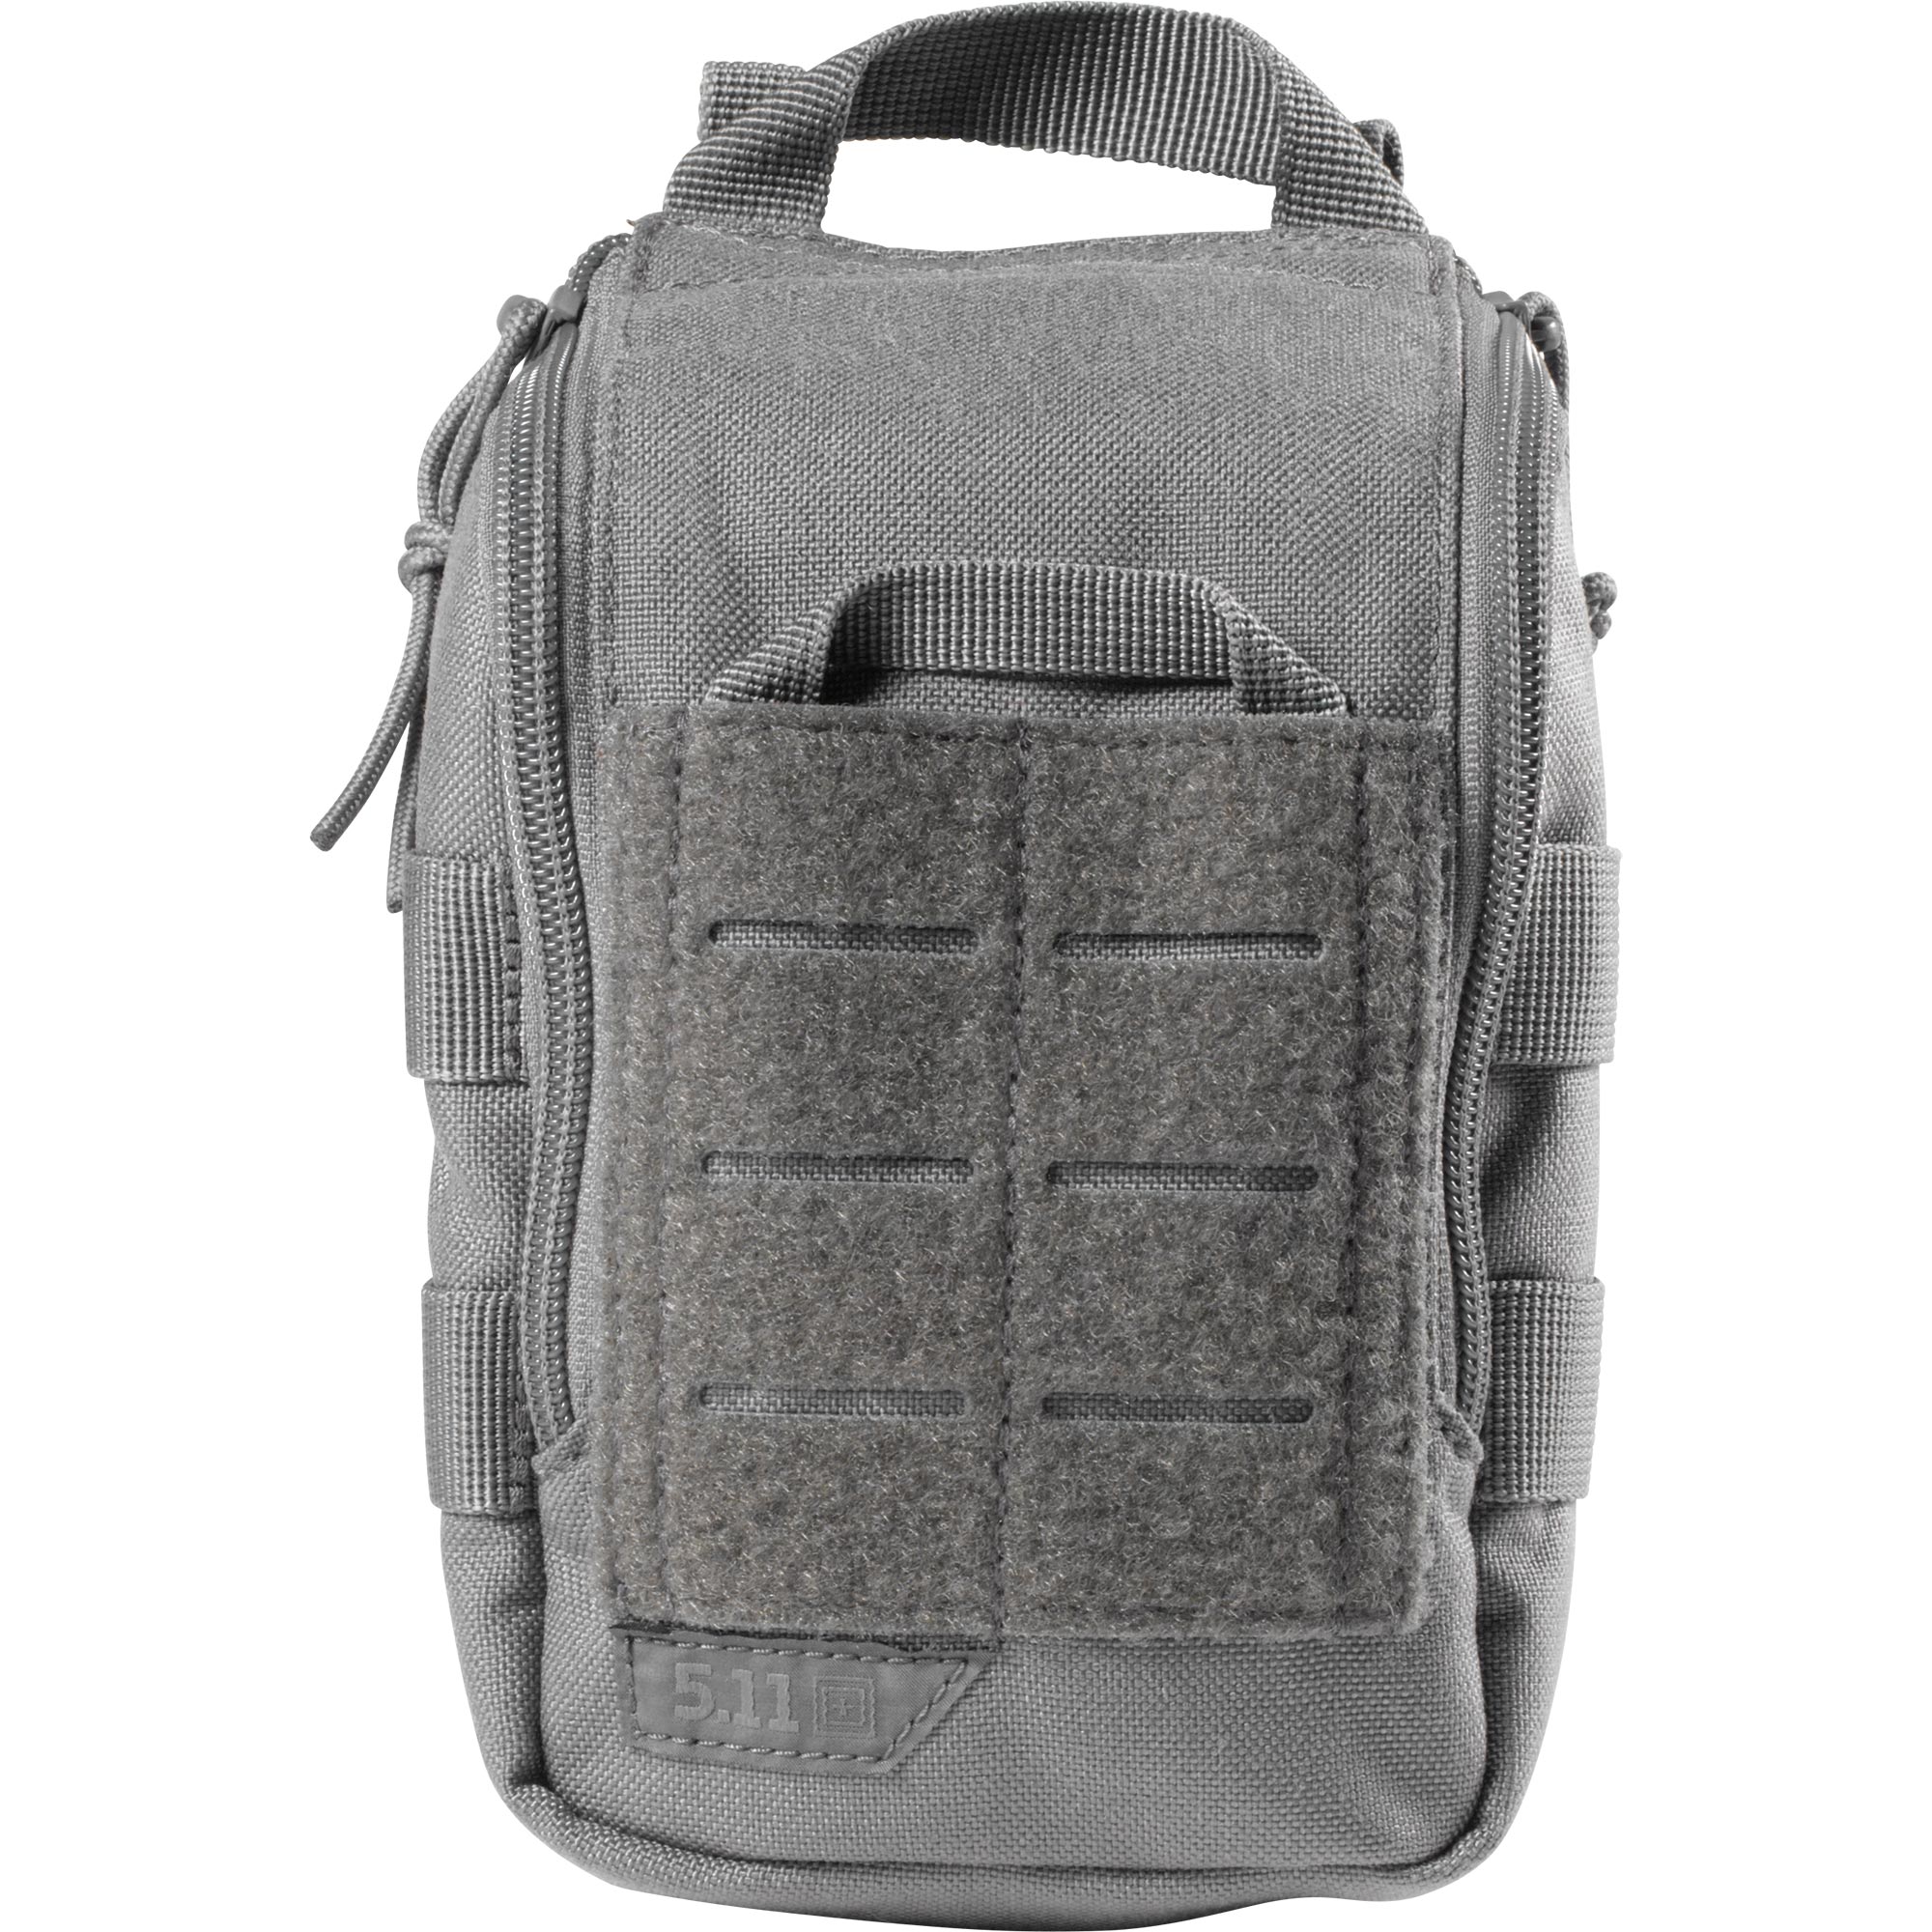 Buy Ucr Ifak Pouch - 5.11 Tactical Online at Best price - CO